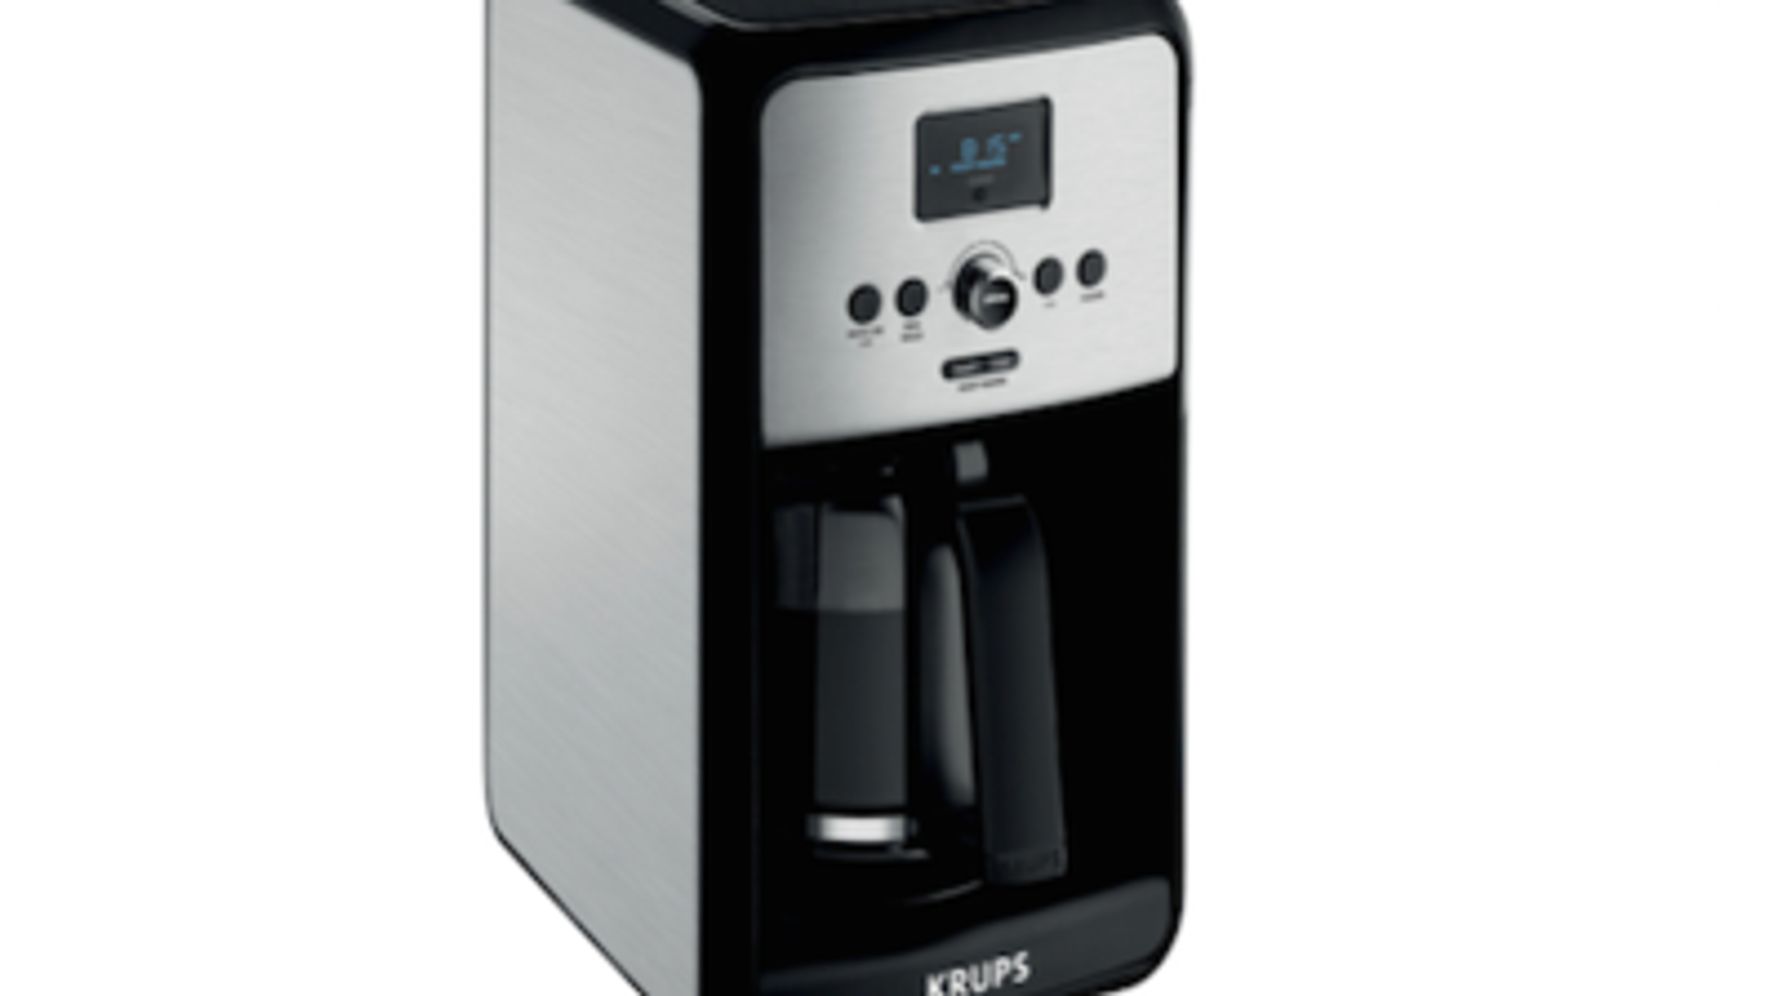 KRUPS 12-Cup Savoy Programmable Stainless Steel Thermal Coffee